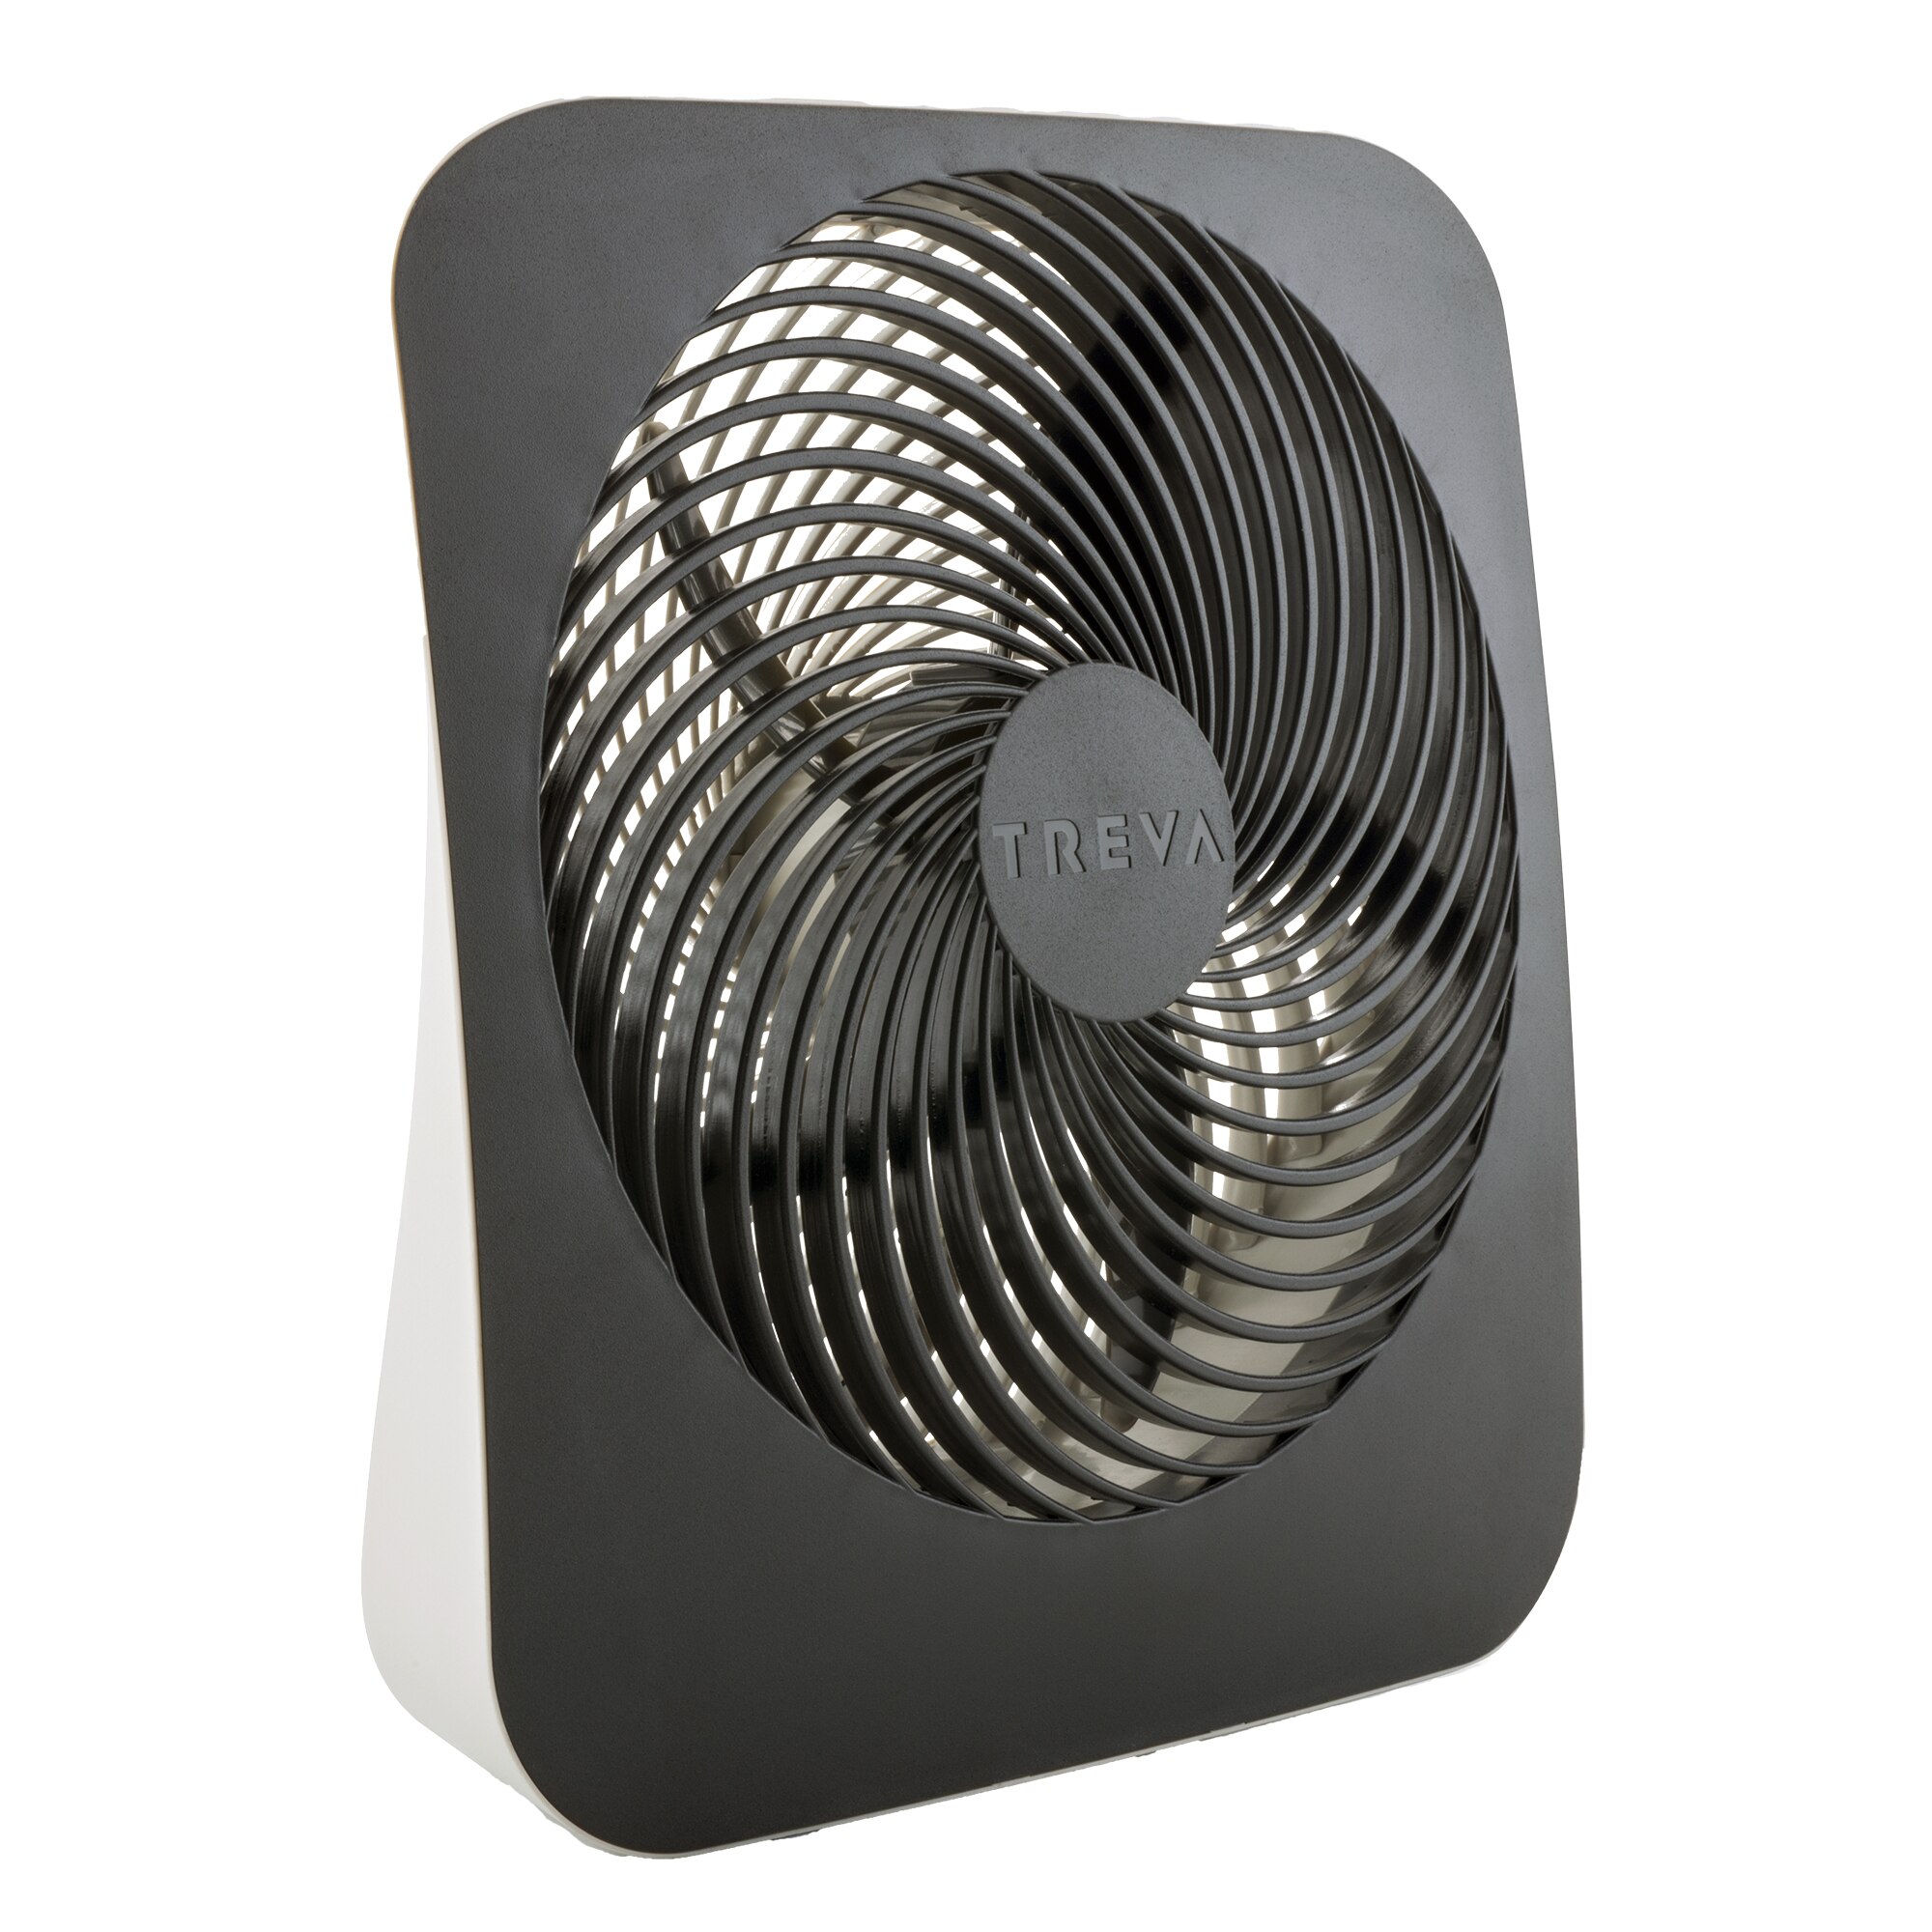 TREVA 10 Inch Battery or Electric Operated Fin Fan with USB